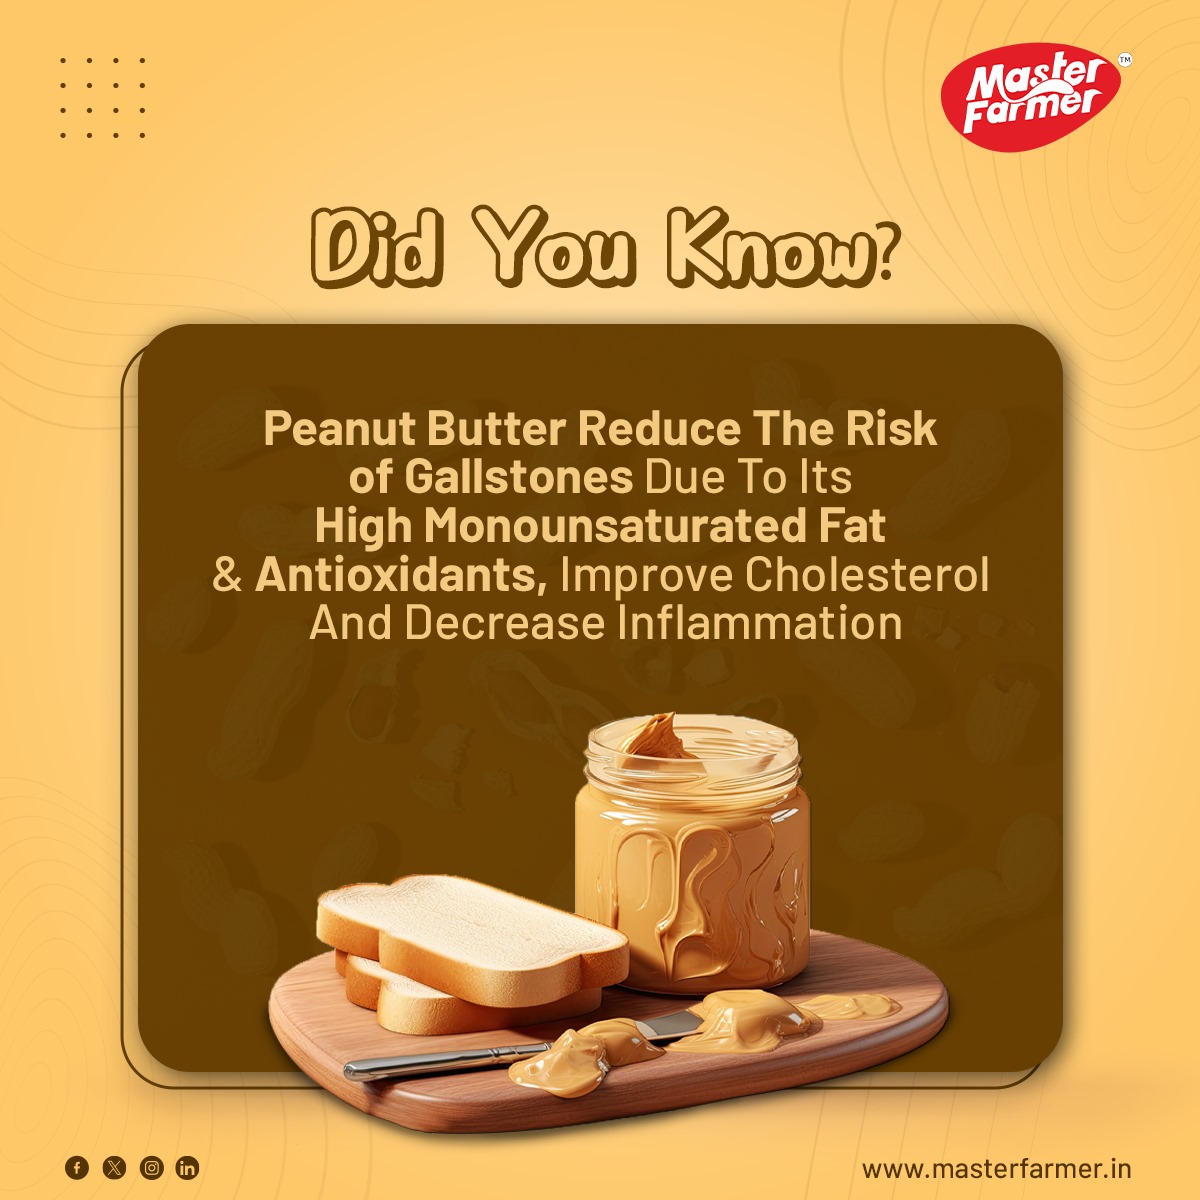 Welcome to another day of delicious health with Master Farmer! A spoonful of this creamy delight can pave the way for a healthier you. So, why not dive into wellness with every bite?
#MasterFarmer #peanutbutter #healthySpread #AntiInflammatoryFood #CholesterolFriendly